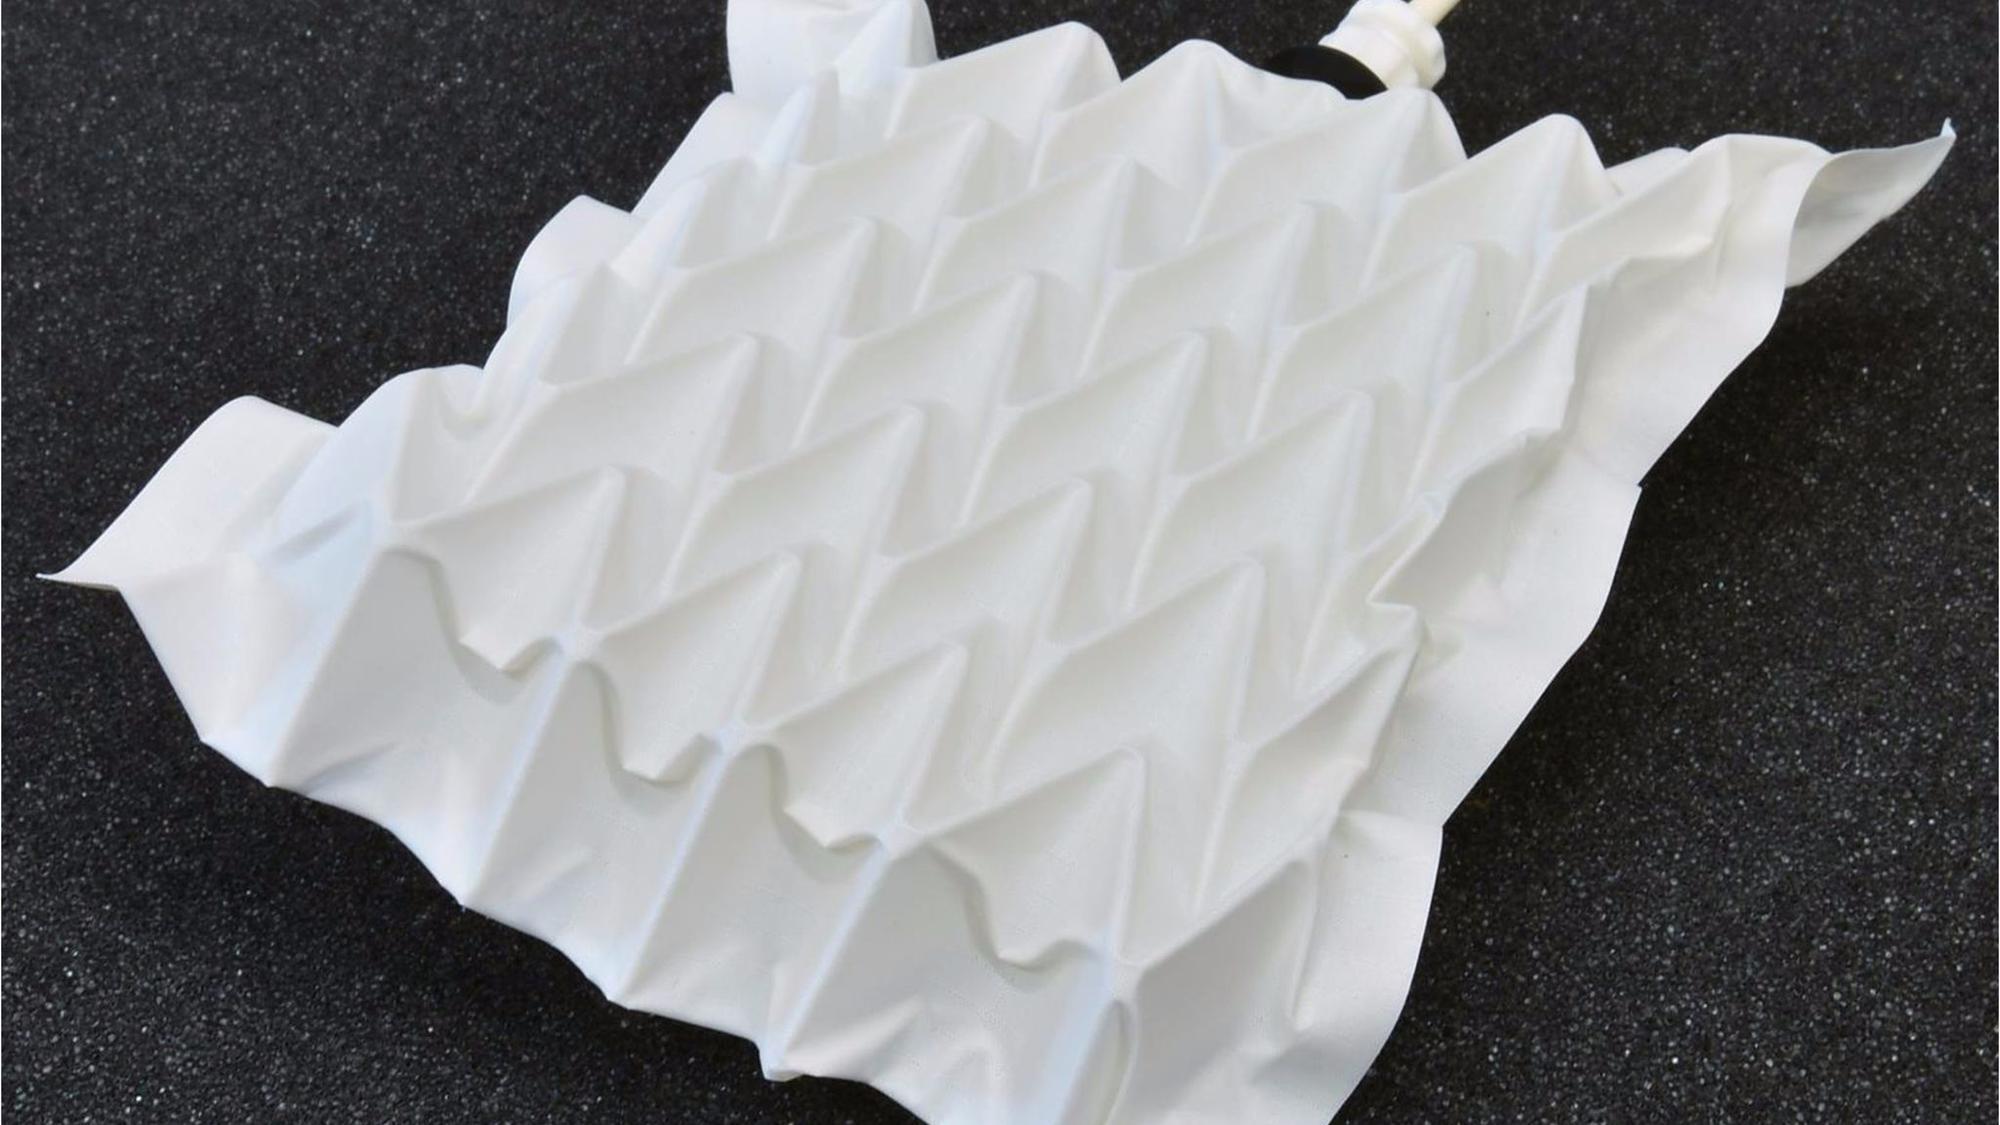 Inspired by origami, scientists build artificial muscle that lifts 1,000 times its own weight